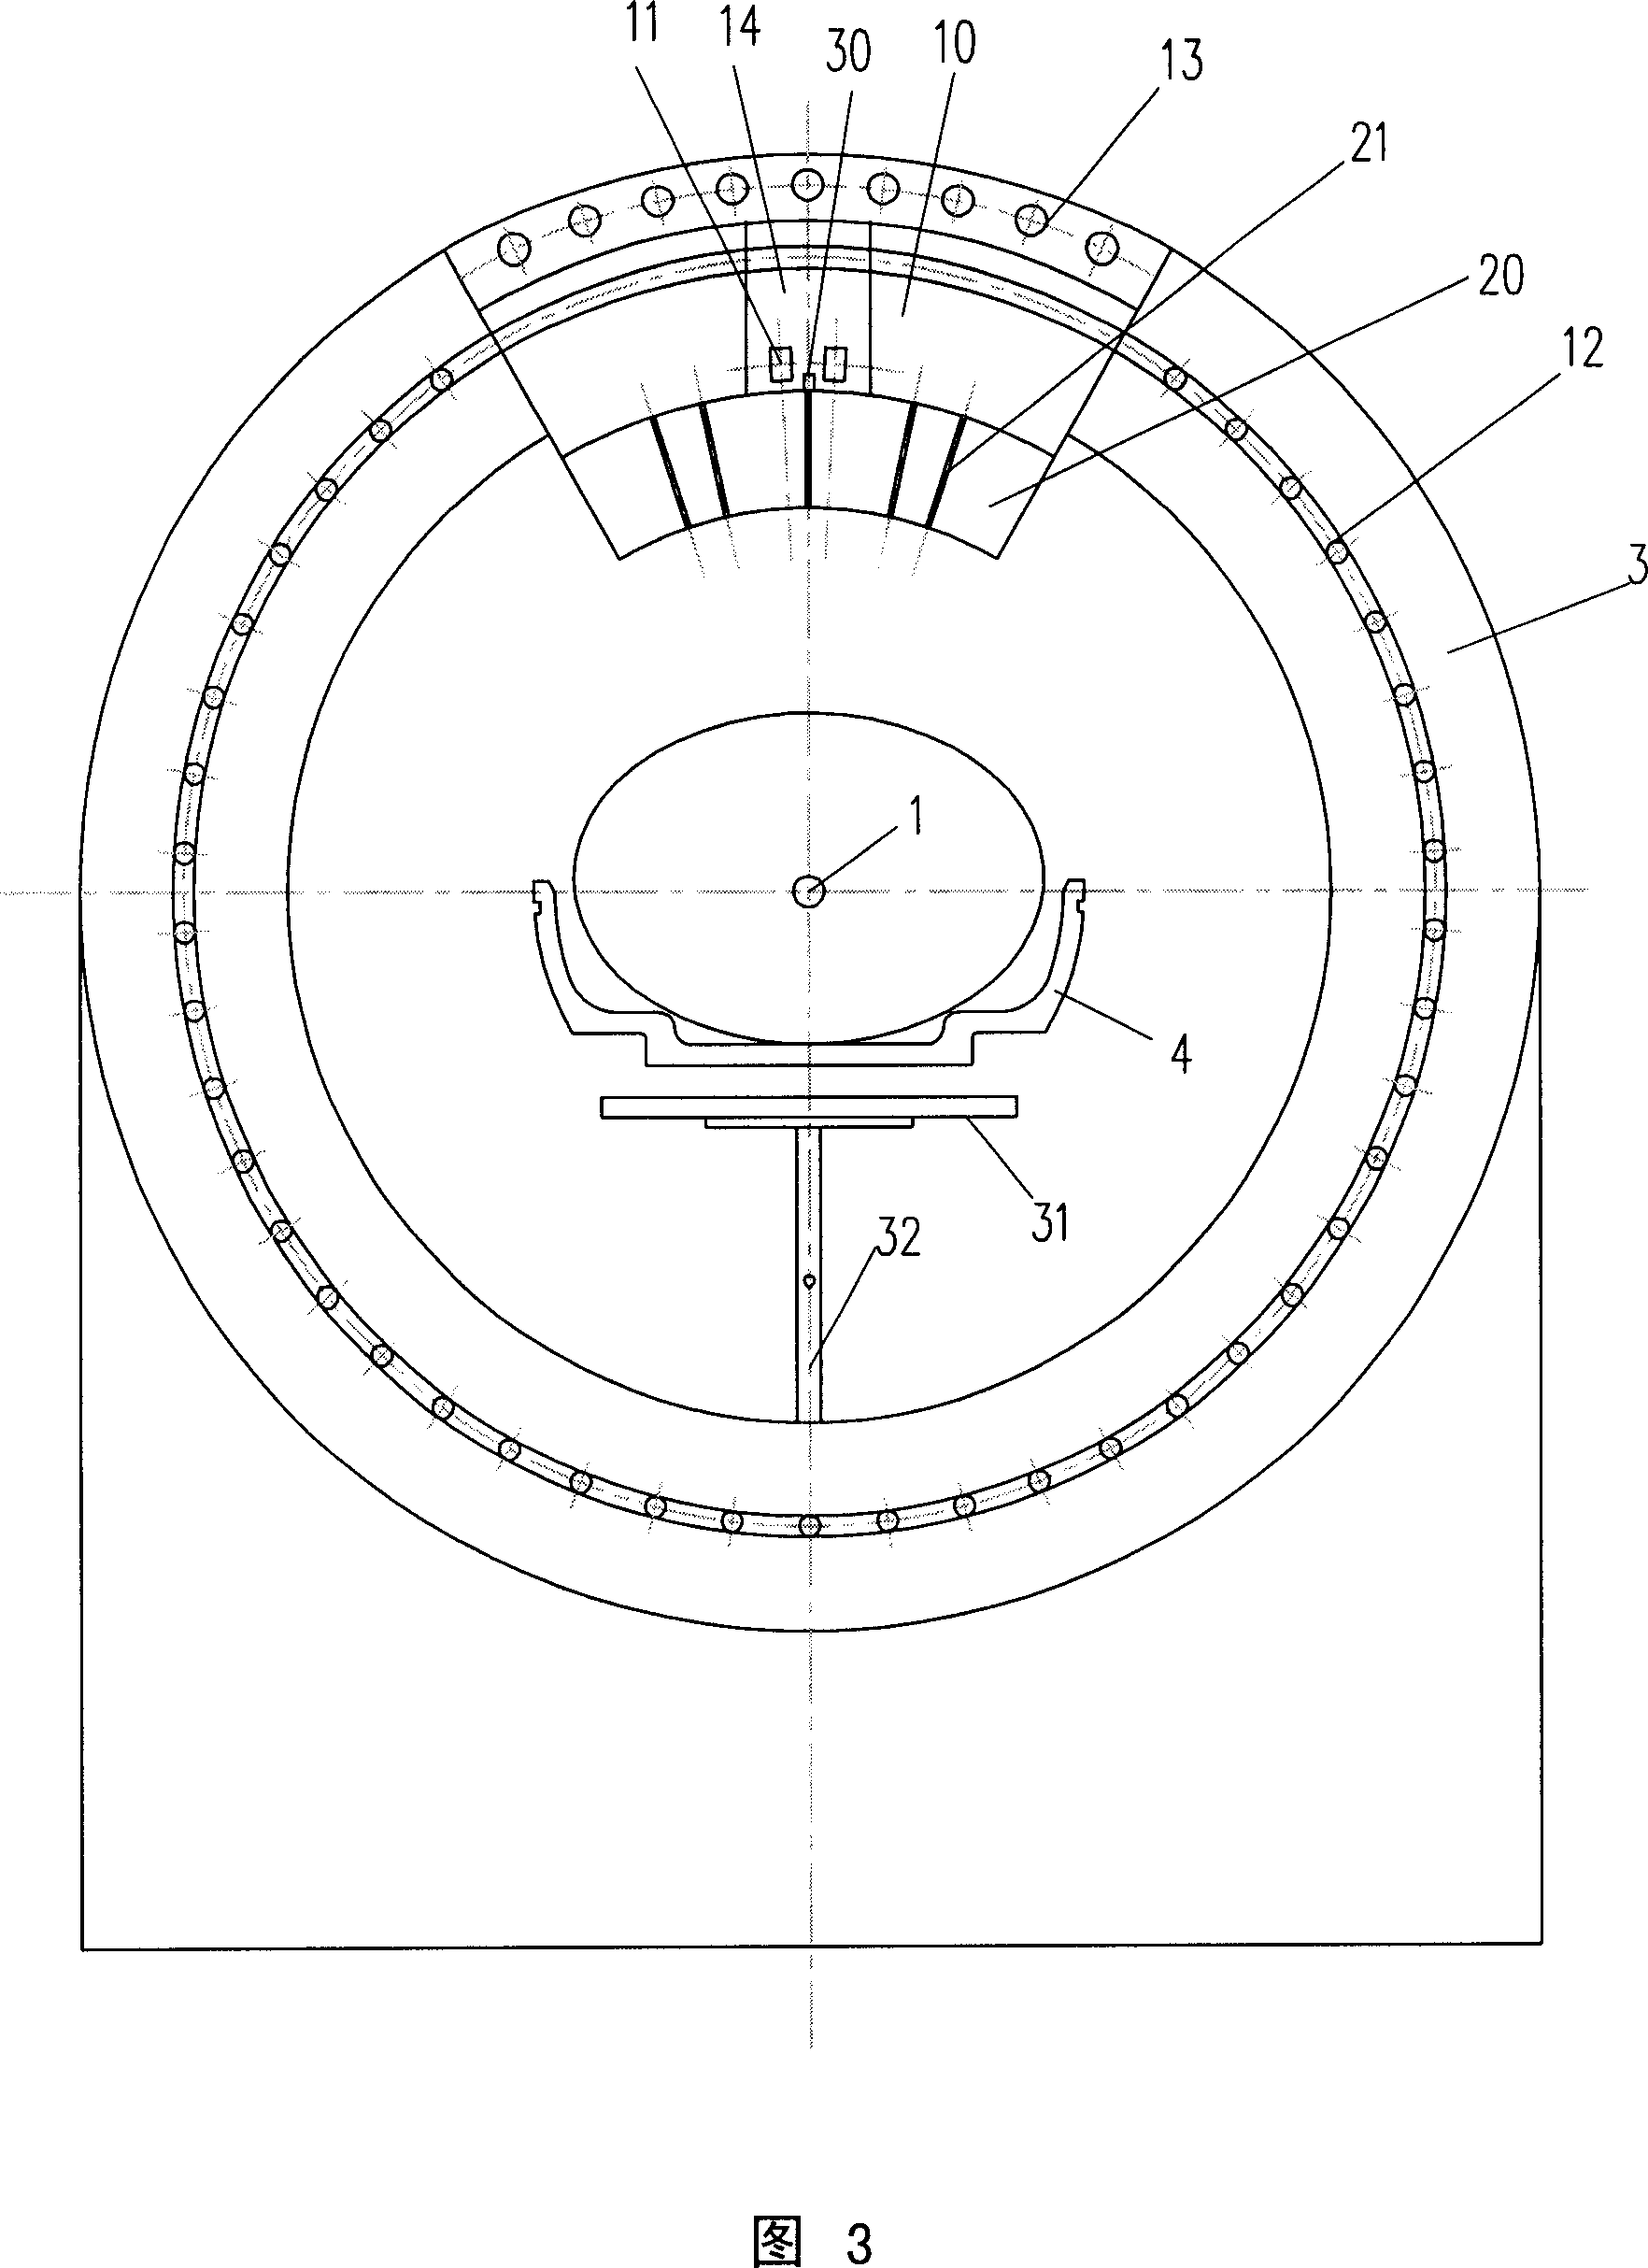 Radiation therapeutical irradiation device